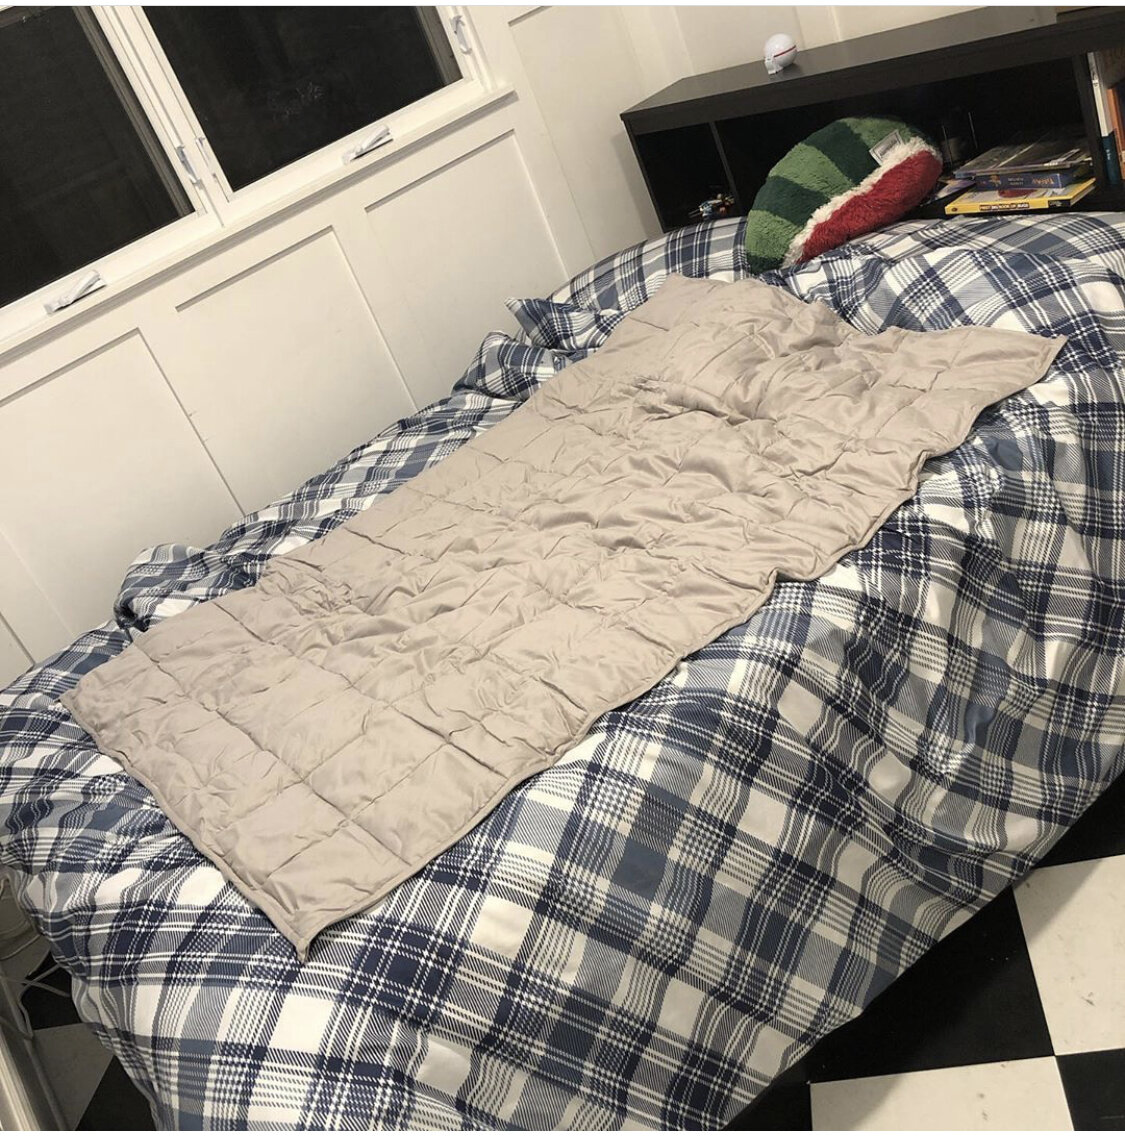 Weighted Blanket... Does It Work? — Access to Education